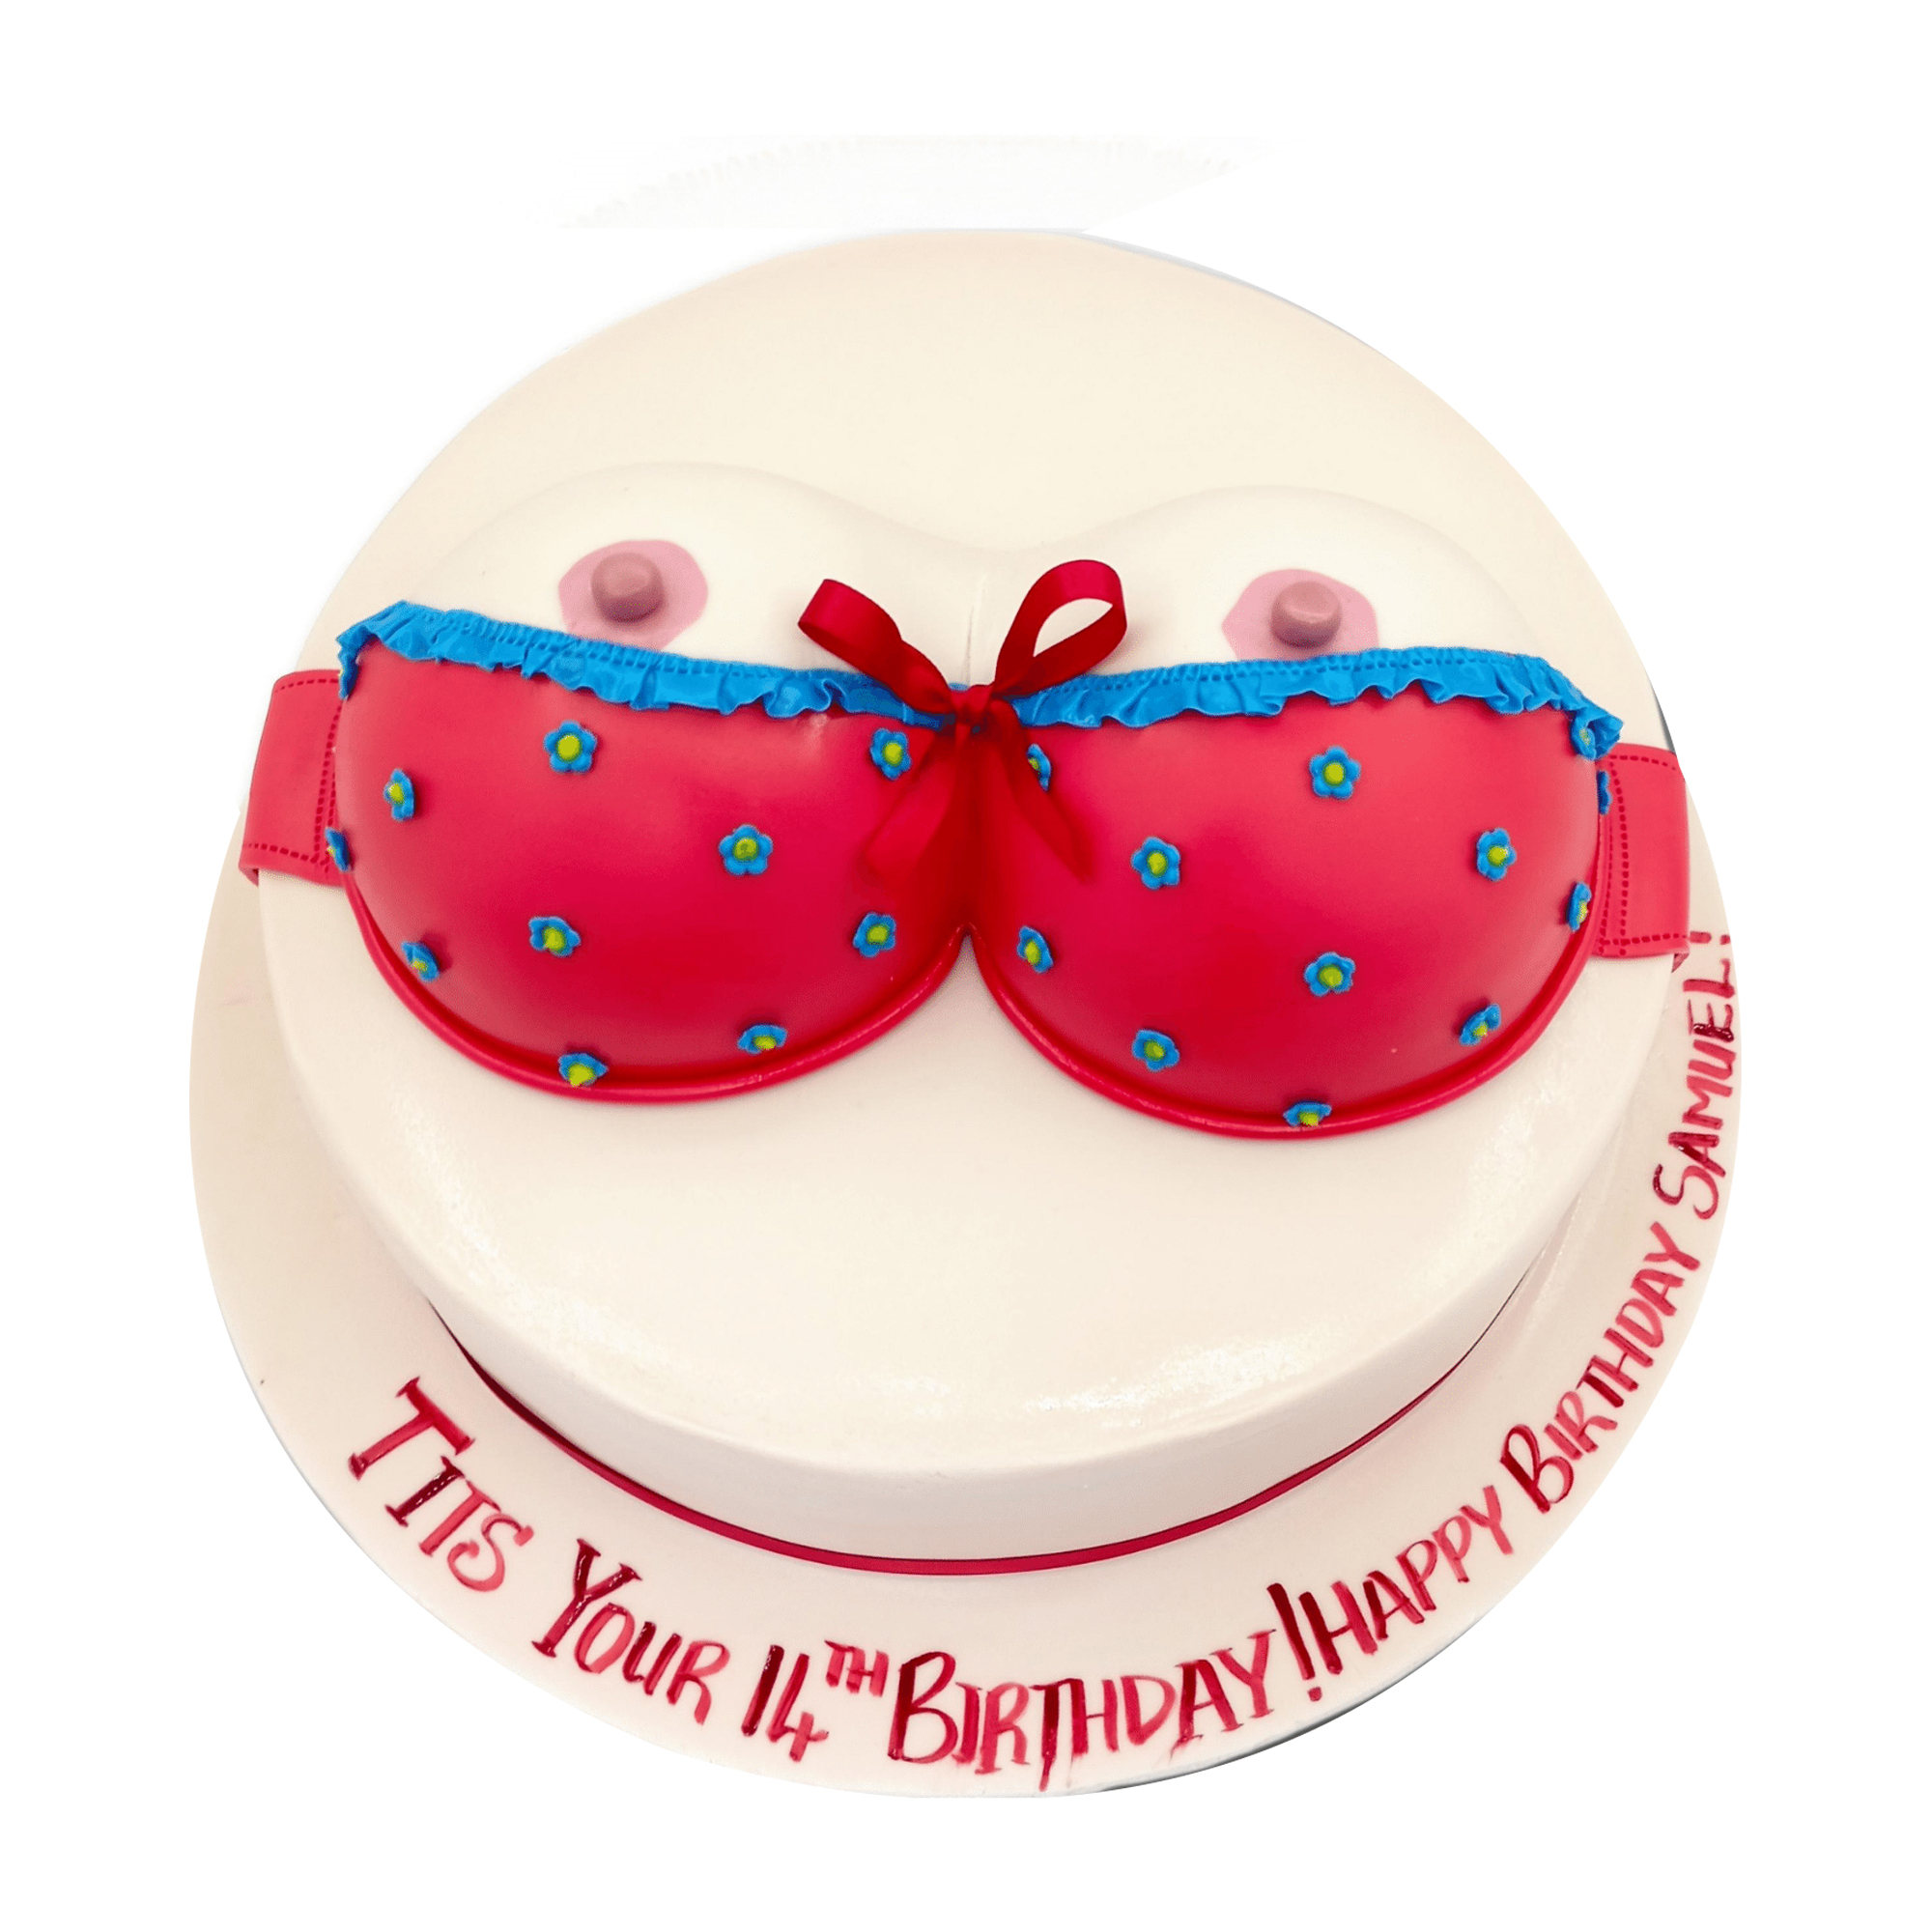 https://www.cakerstreet.com/upload/Product_images/adult-themed-cakes-13935-11778bf45.JPG